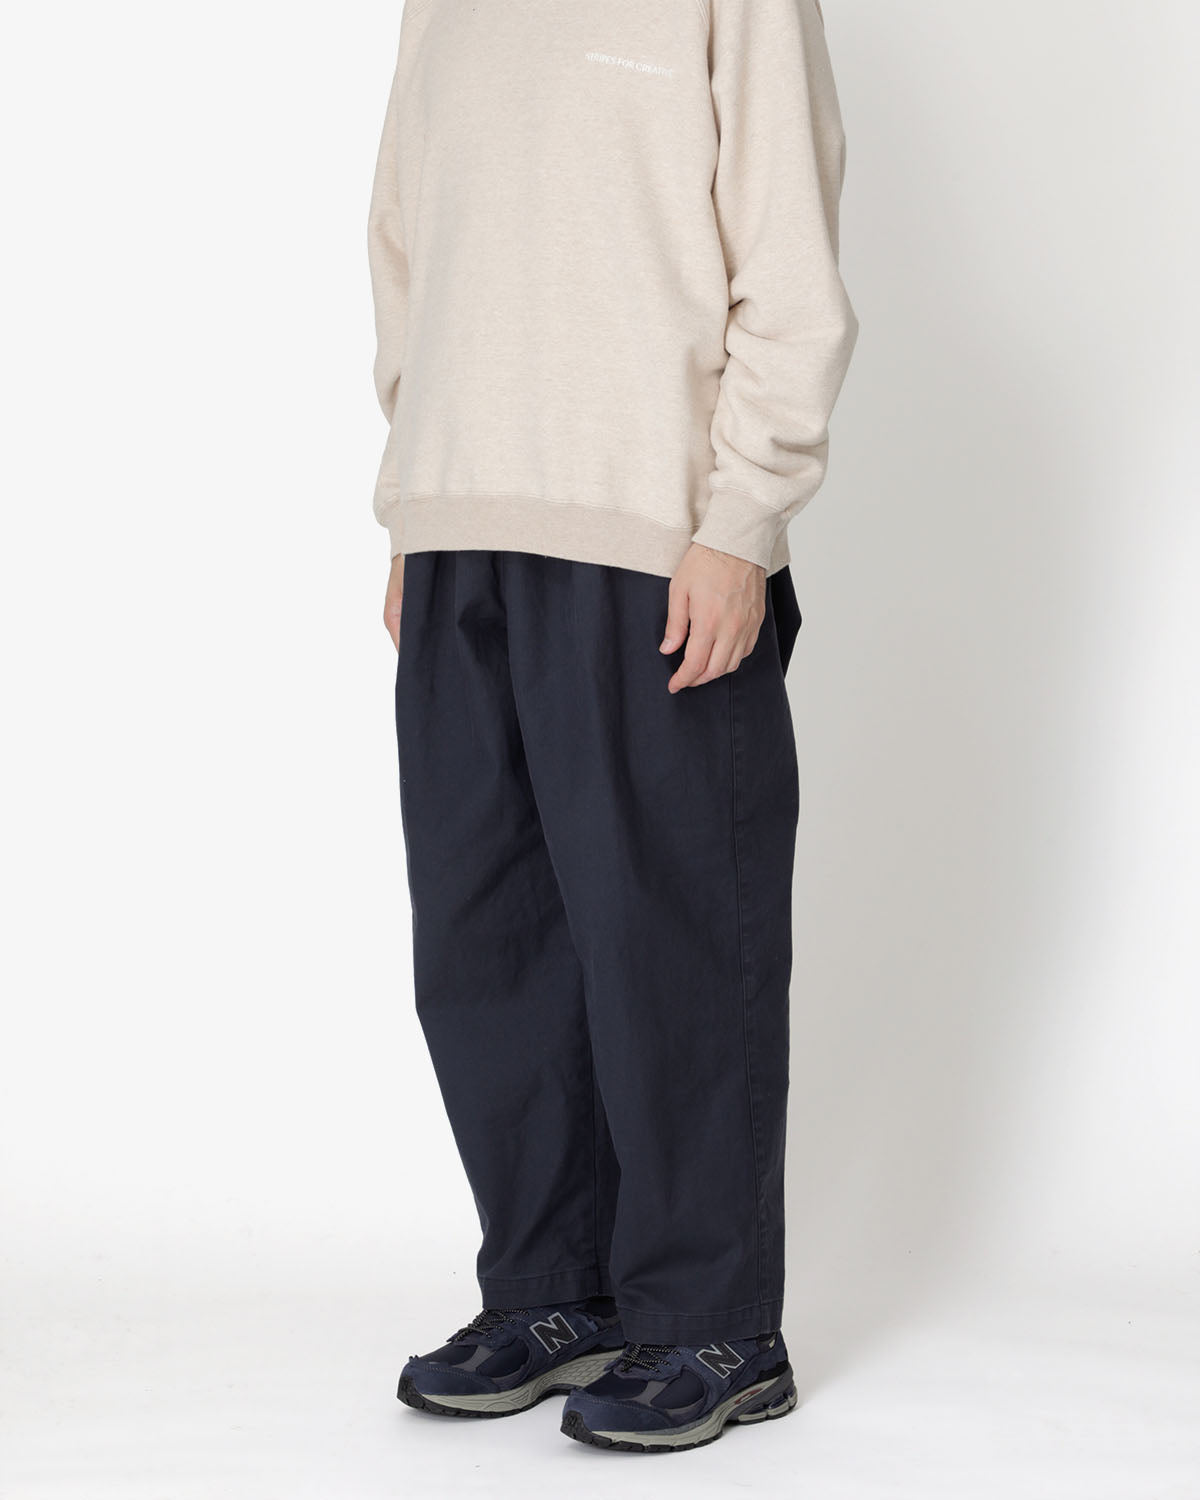 SUPER WIDE CHINO PANTS